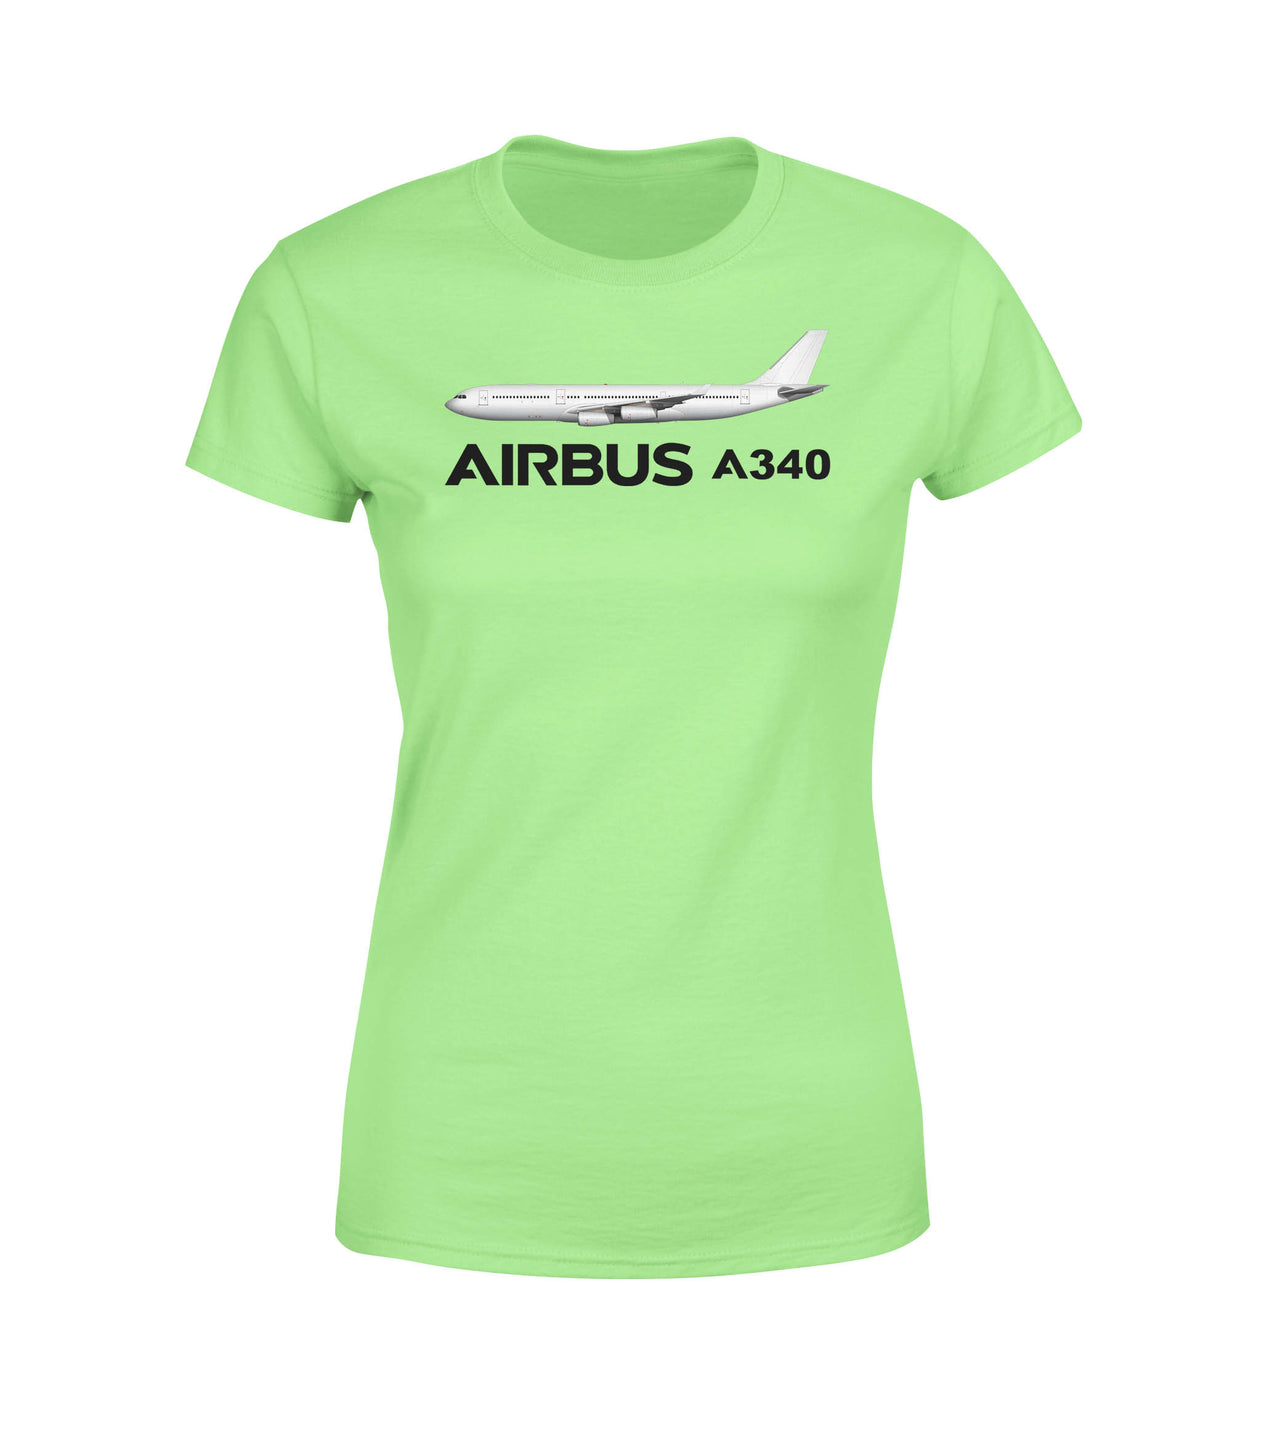 The Airbus A340 Designed Women T-Shirts